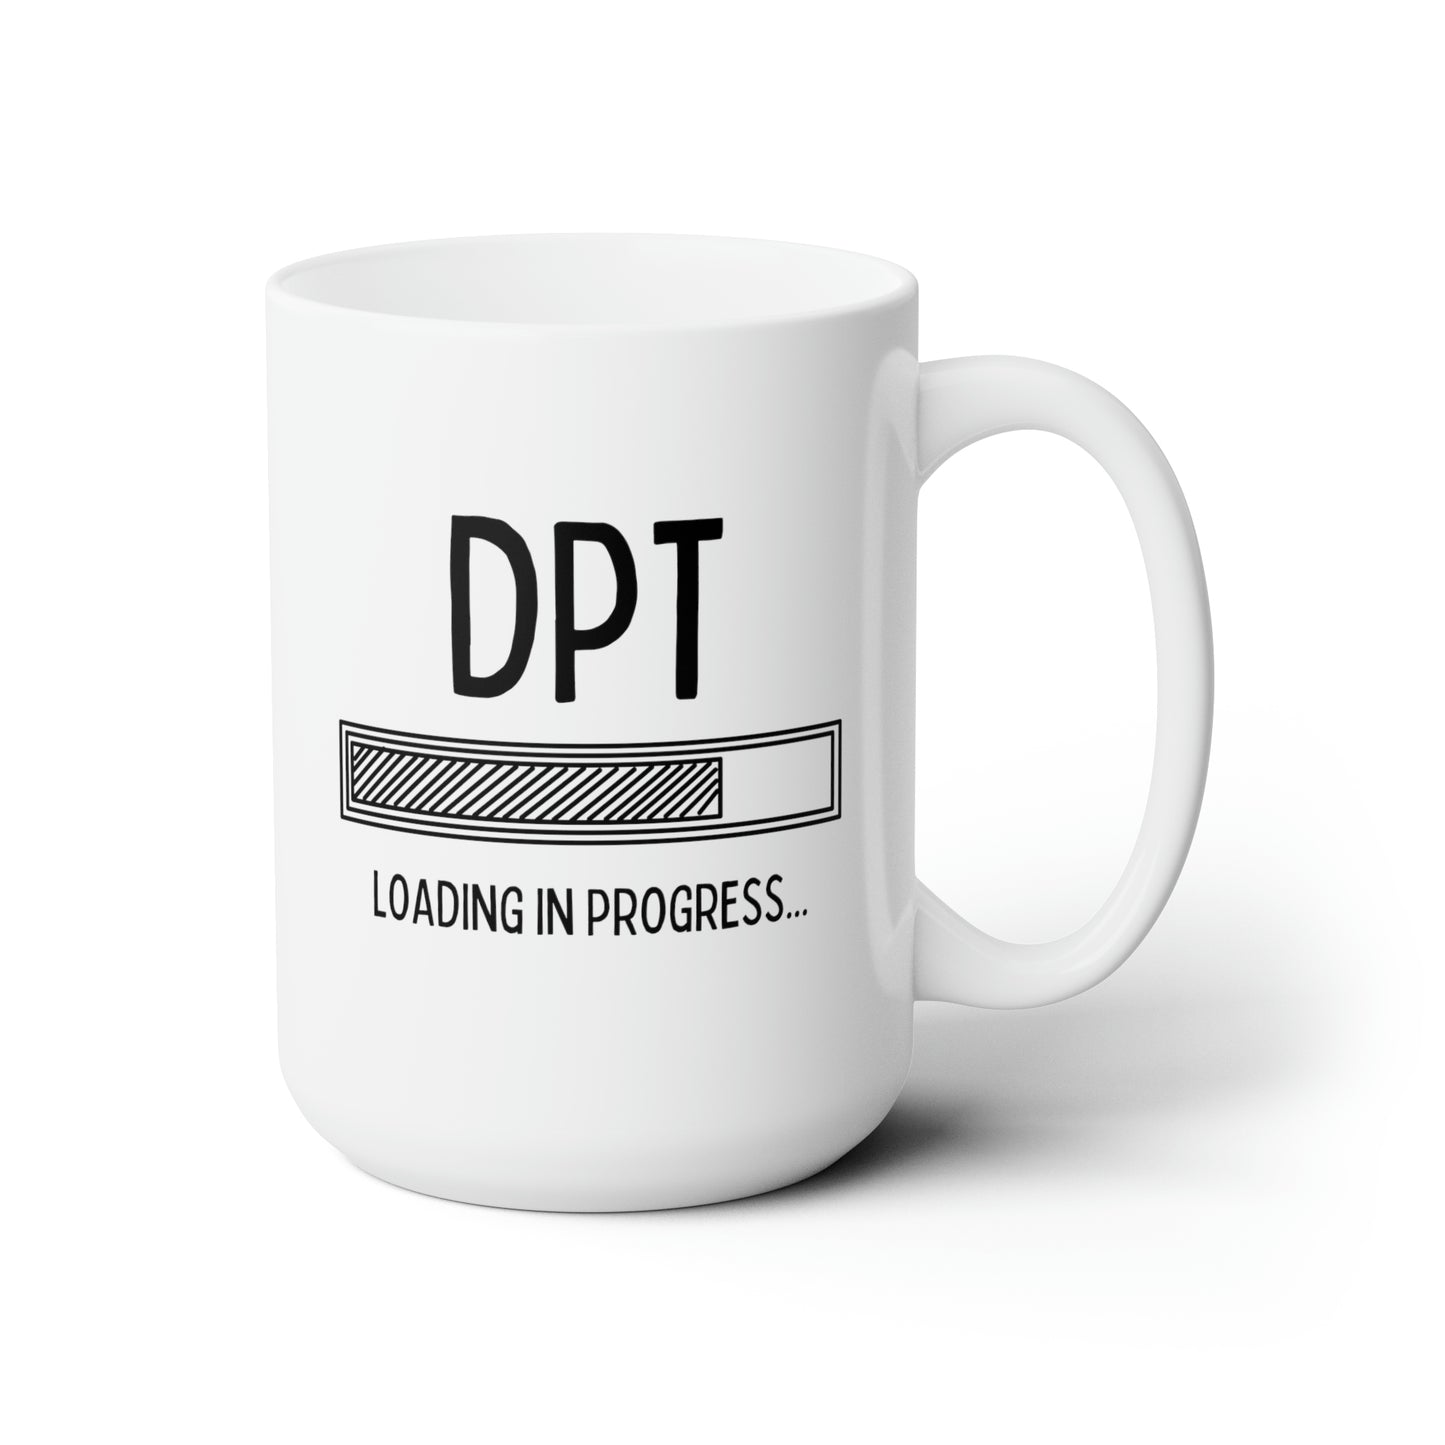 DPT Loading in Progress 15oz white funny large coffee mug gift for doctor of physical therapy student graduation Dr medicine waveywares wavey wares wavywares wavy wares